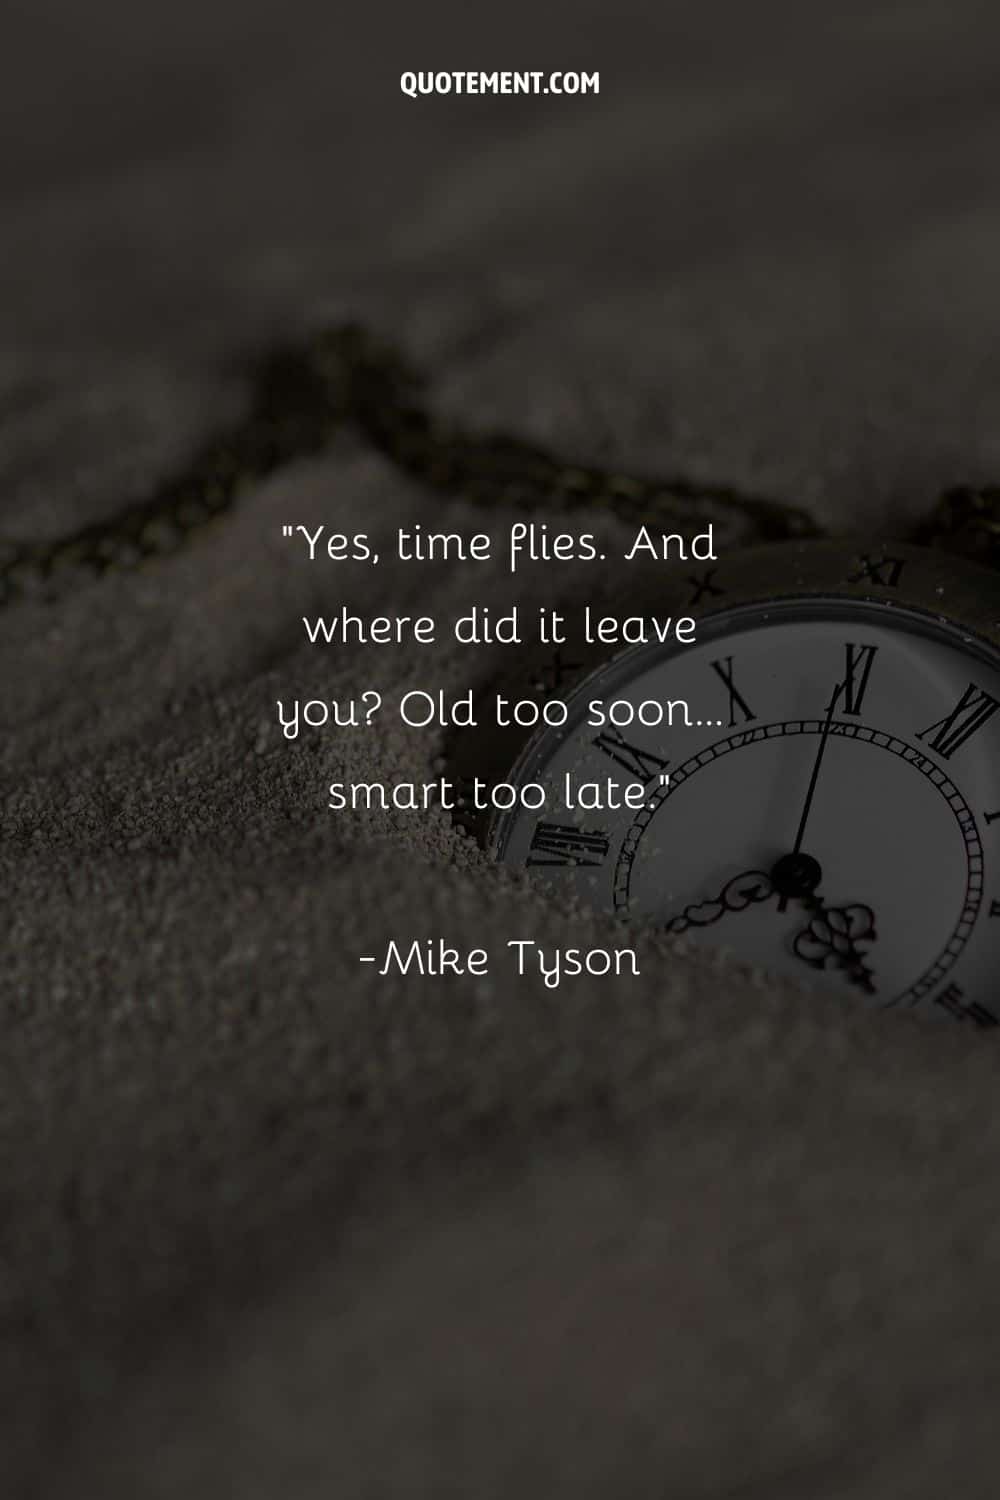 a pocket watch buried in the sand representing an insightful time flies so fast quote
